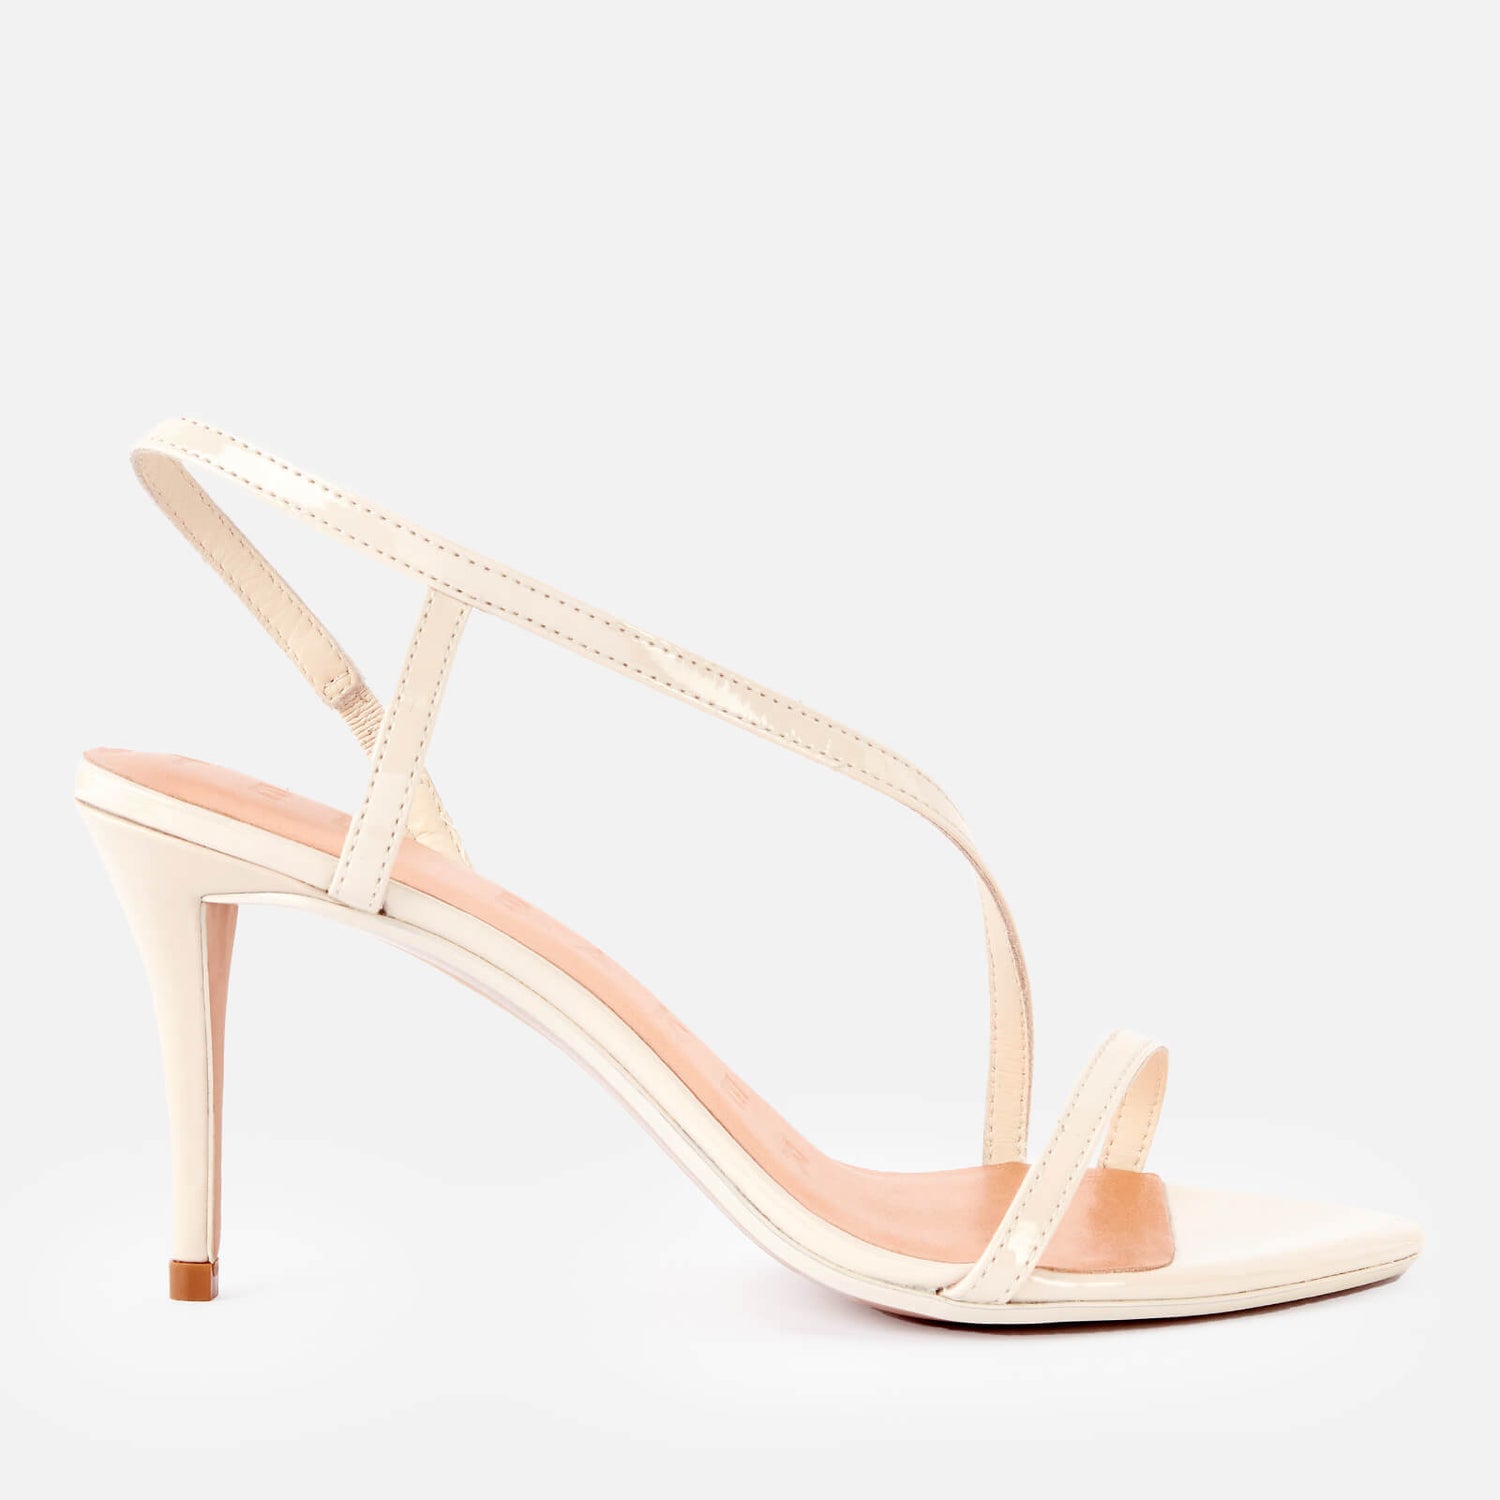 Ted Baker Women's Pippel Barely There Heeled Sandals - Nude